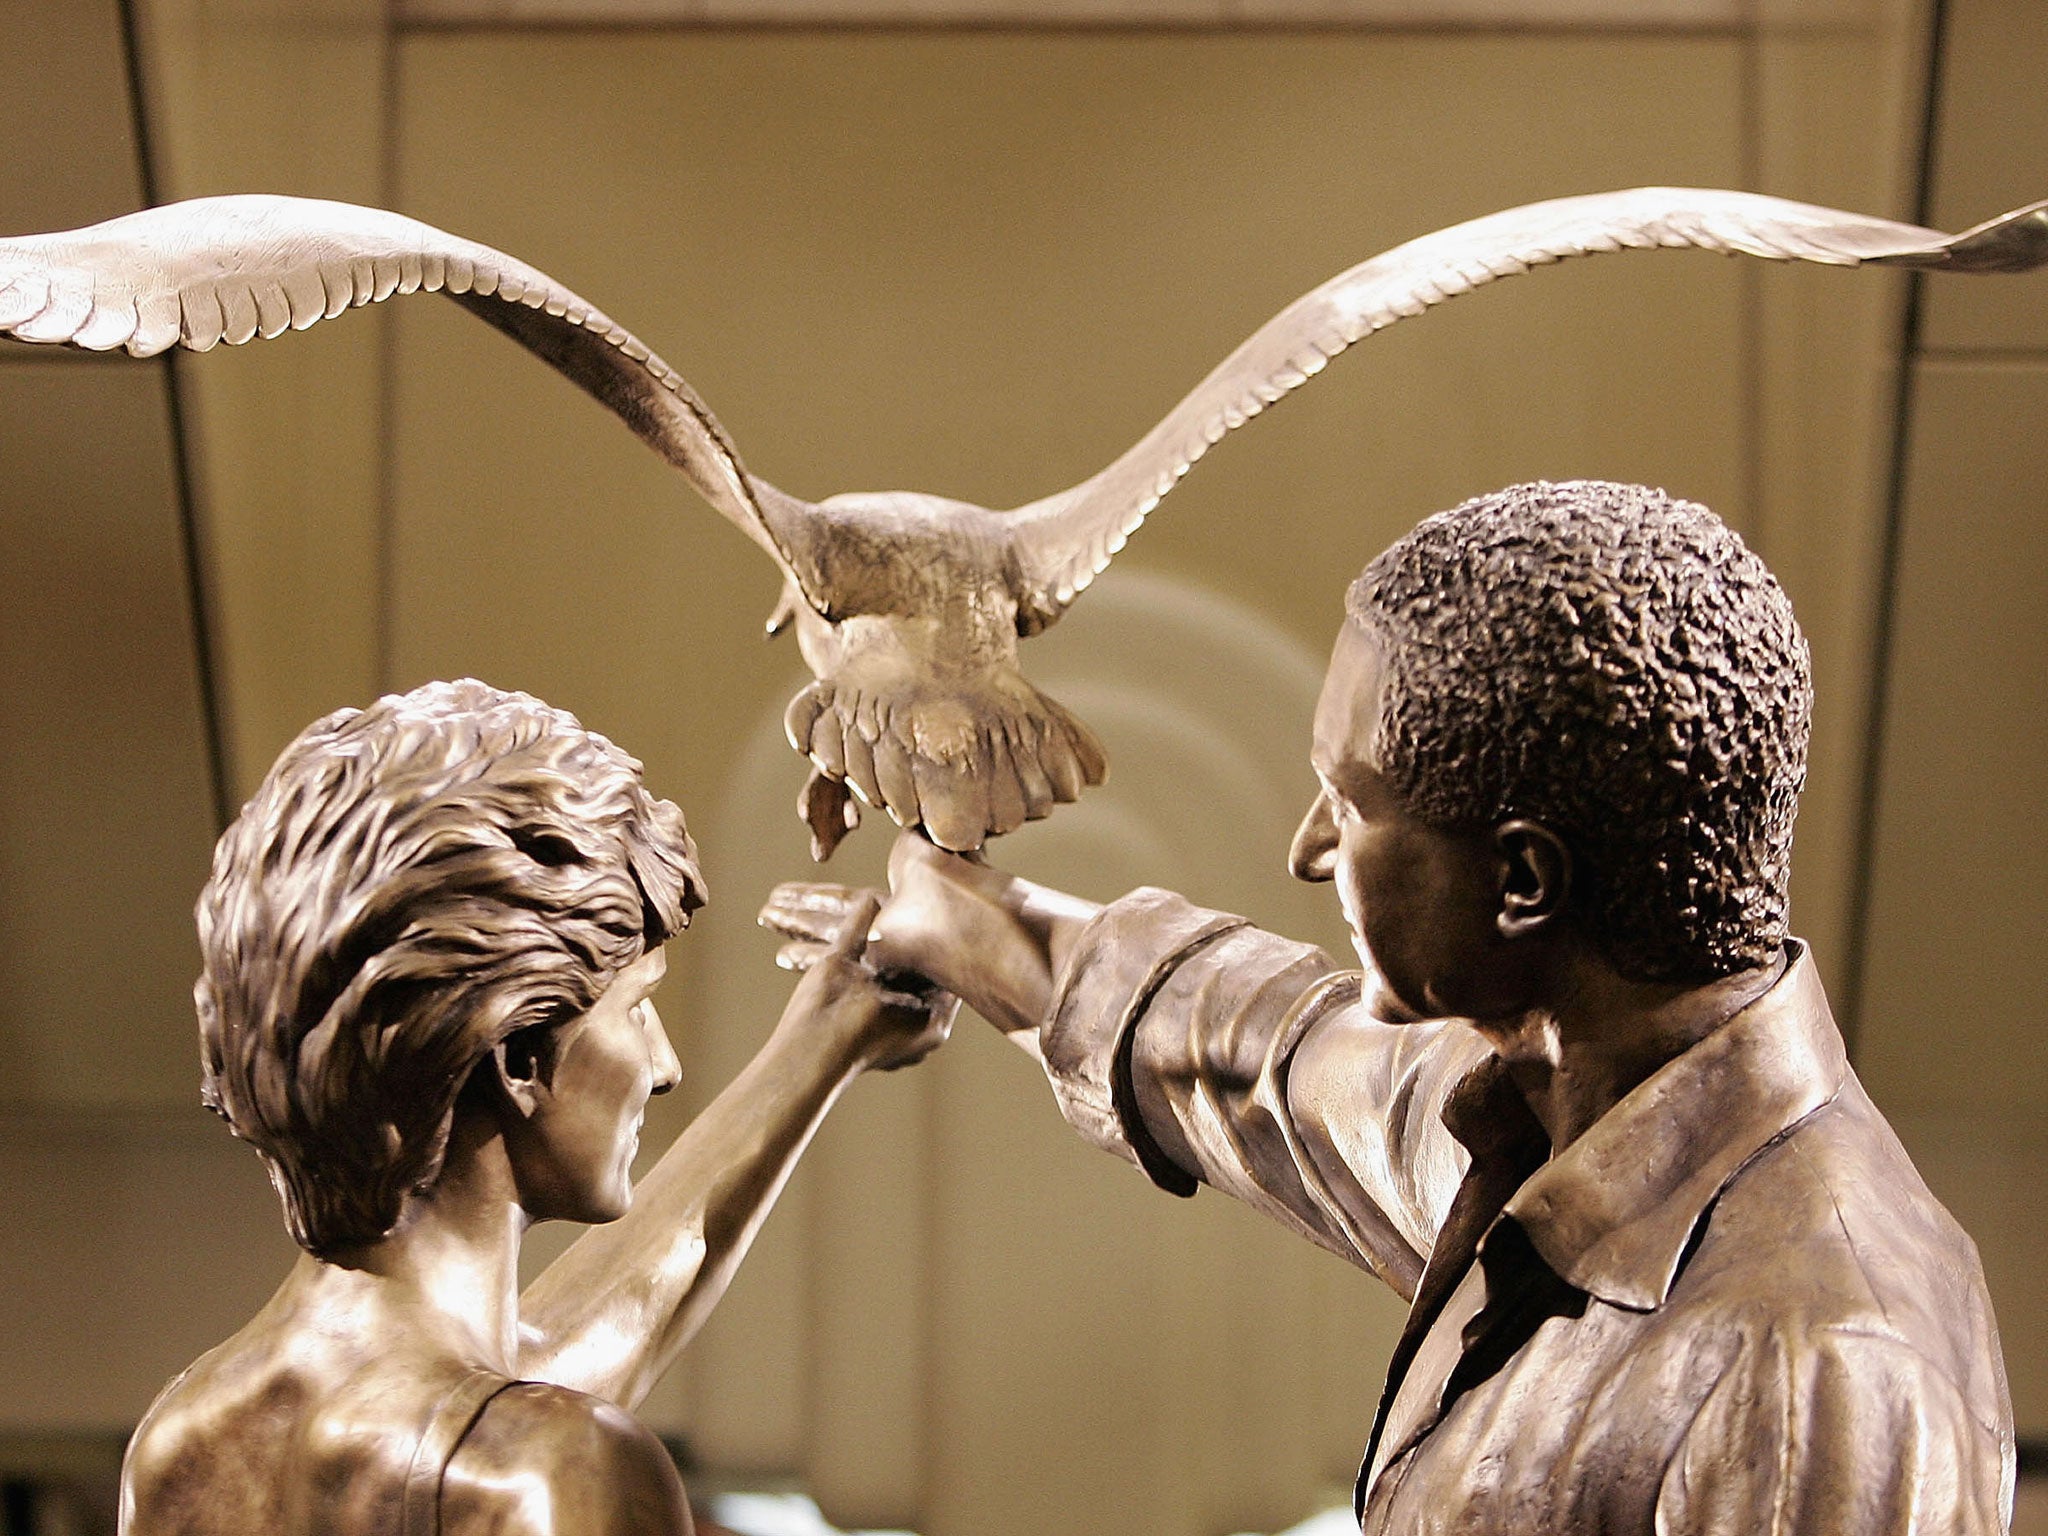 A statue of Diana, Princess of Wales and Dodi Al Fayed is unveiled at Harrods department store on 1 September, 2005 in London.